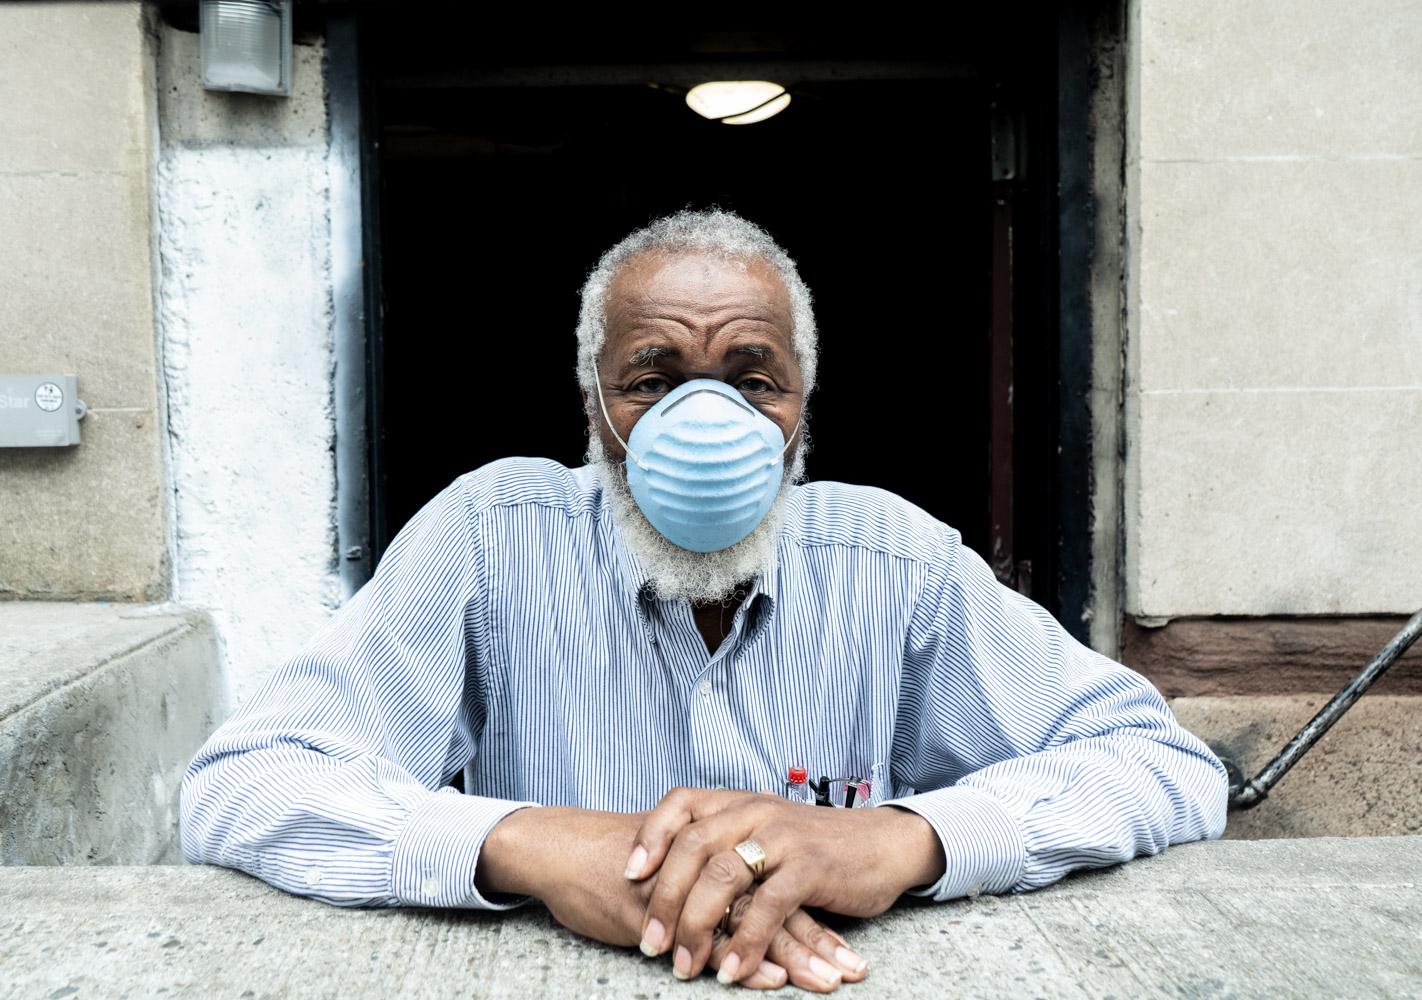 May 28, 2020: Ronald, a 67-year-old building contractor, takes a break on Fulton Street at Arlington Place in Brooklyn, NY. When asked about the pandemic, he tells me, “Things are better, there is nothing to be afraid of.” © Camilo José Vergara